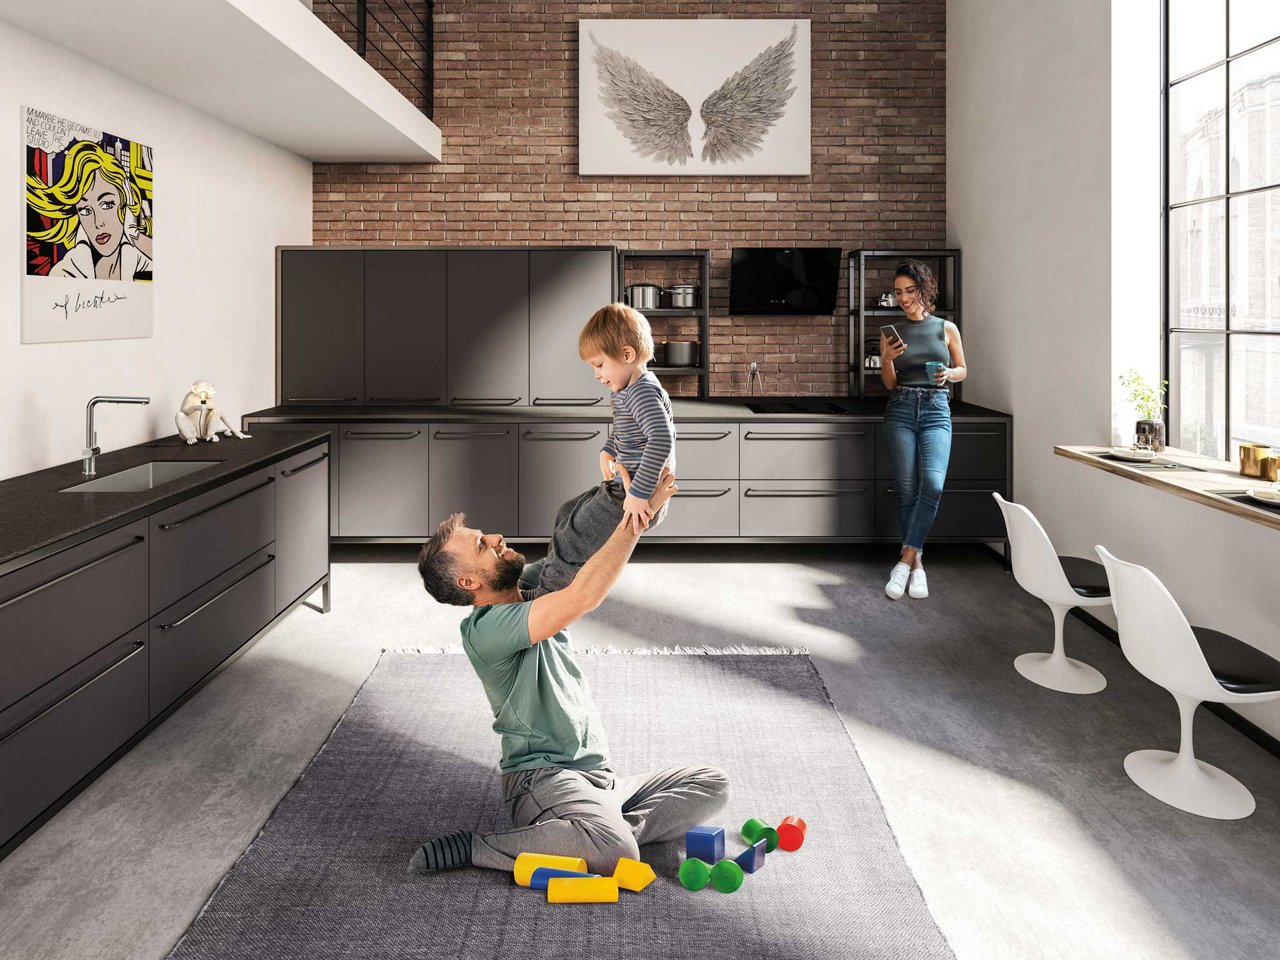 Modern loft kitchen with a man playing with a young child on the kitchen floor